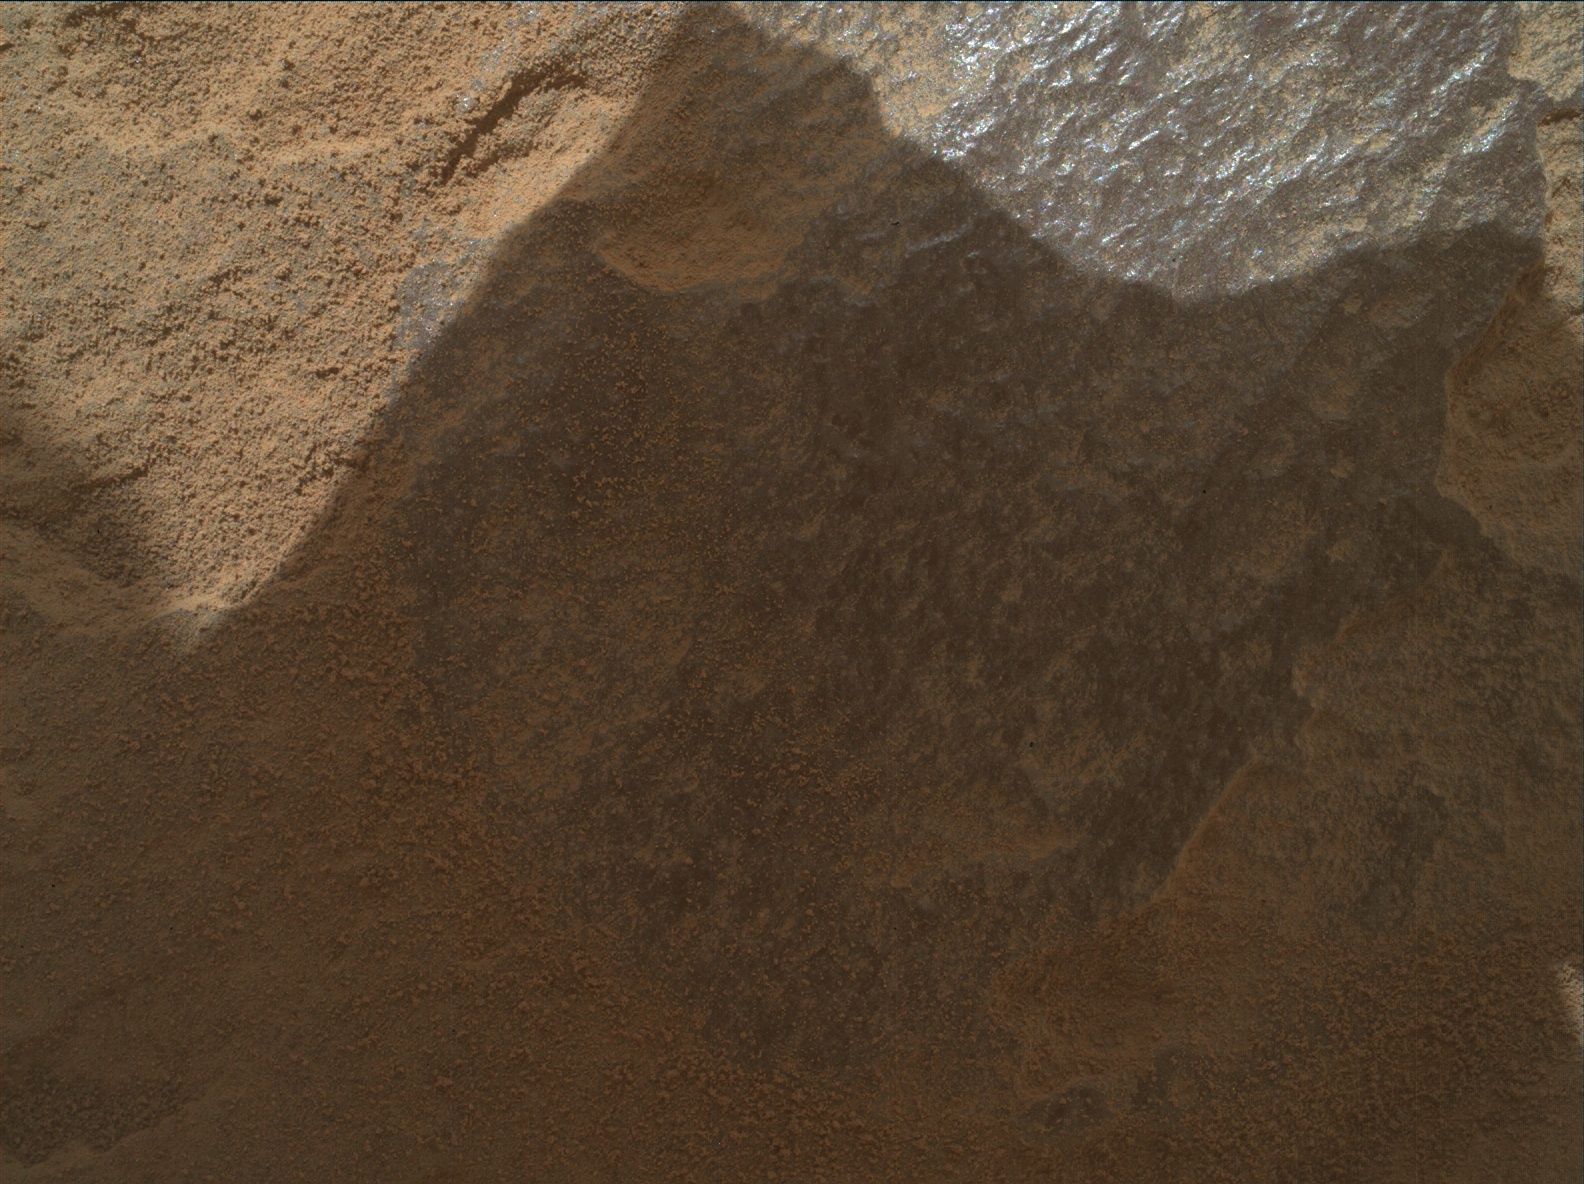 Nasa's Mars rover Curiosity acquired this image using its Mars Hand Lens Imager (MAHLI) on Sol 3737